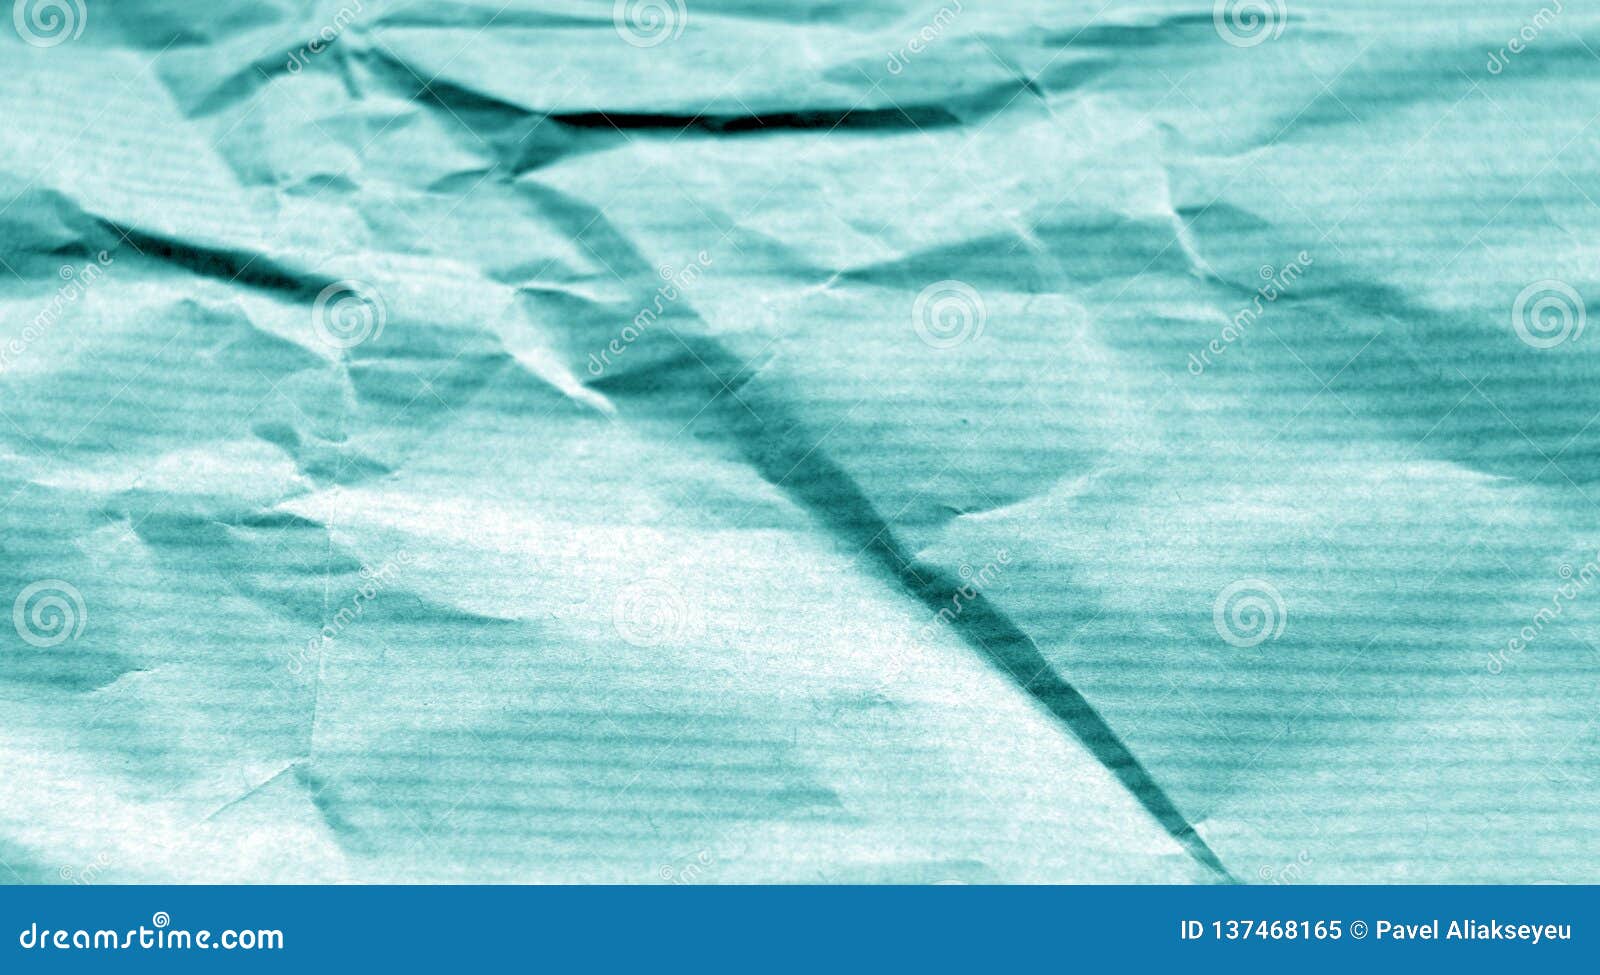 Crumpled Sheet Of Paper With Blur Effect In Cyan Tone Stock Image Image of parchment, grungy